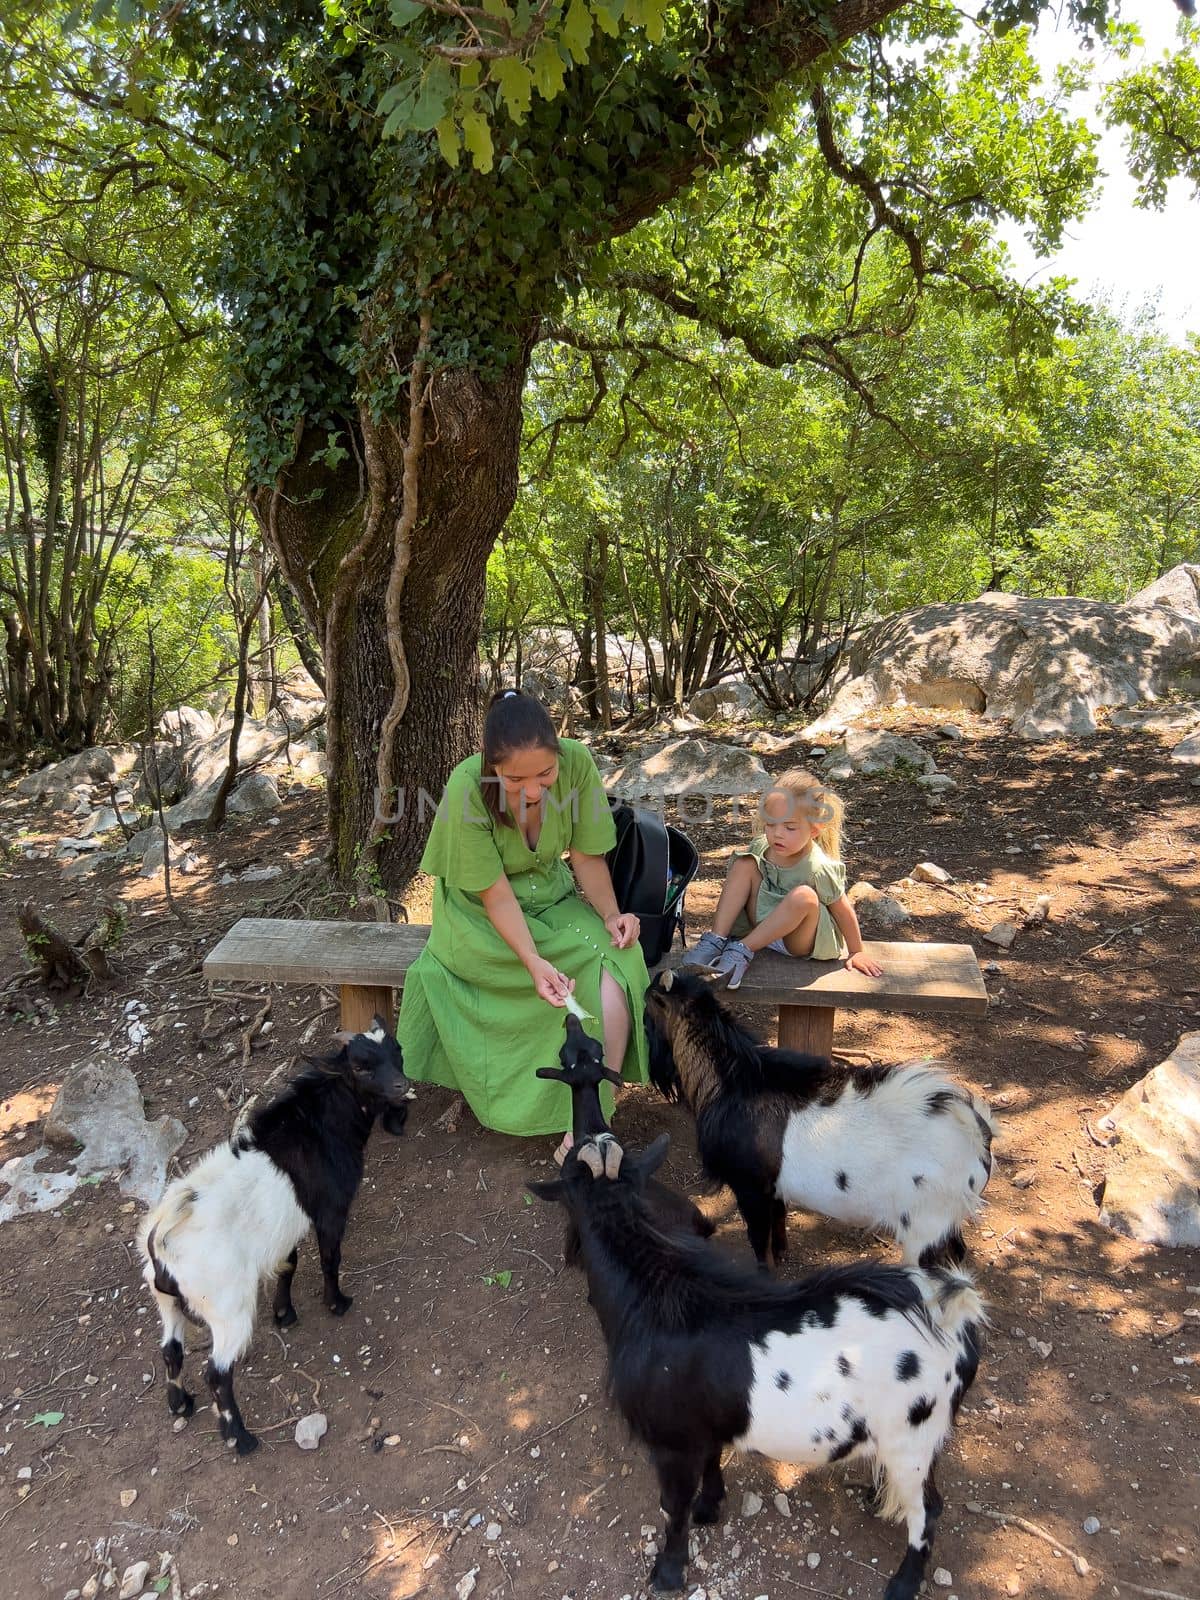 Mom and little girl are sitting on a bench and feeding goats by Nadtochiy